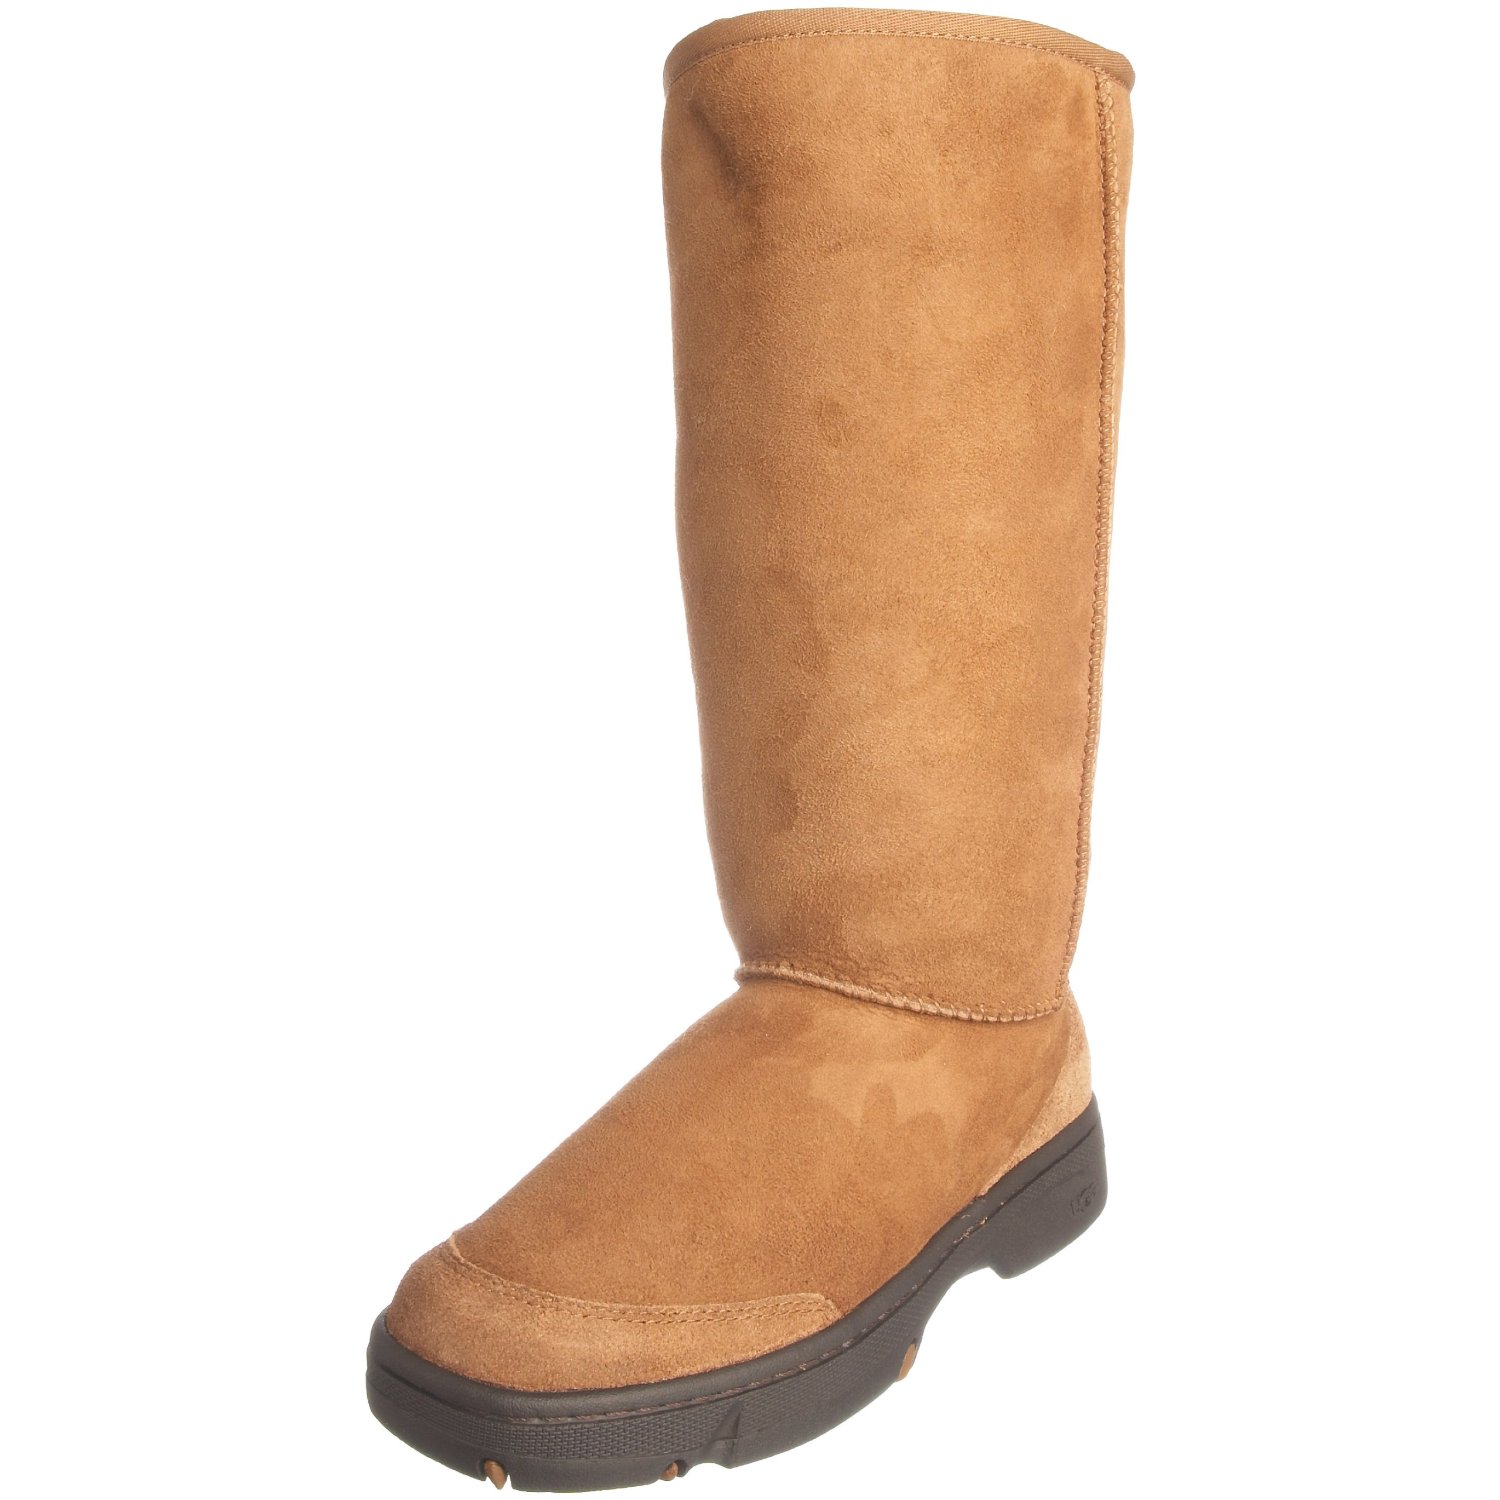 UGG Women's Ultimate Tall Braid Boots $169.99